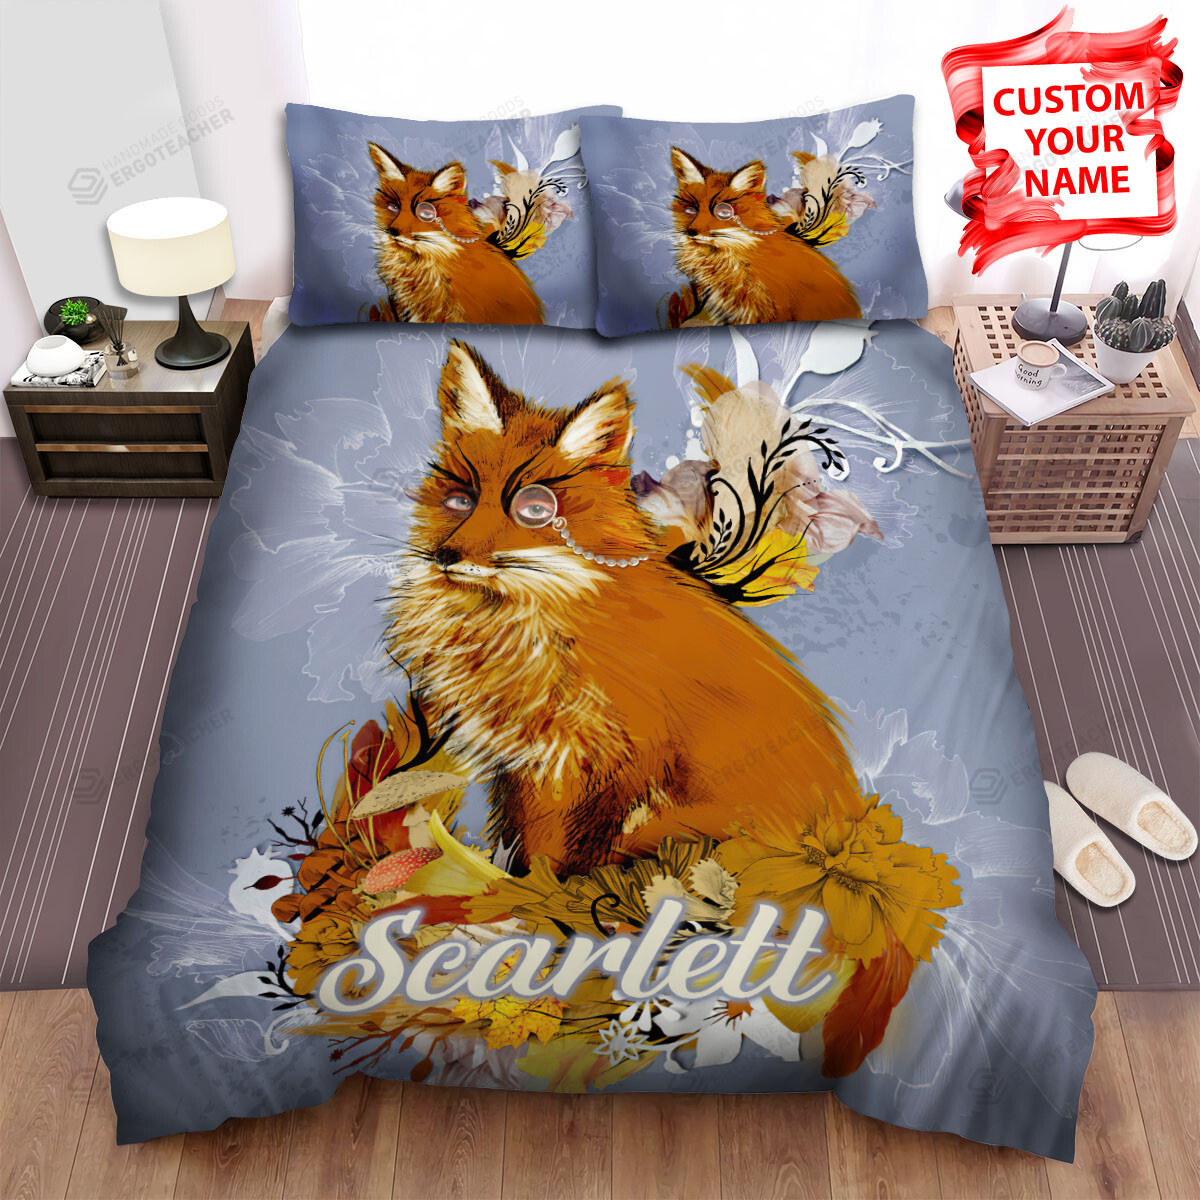 Personalized The Fox And His Monoclope Bed Sheets Spread Duvet Cover Bedding Sets